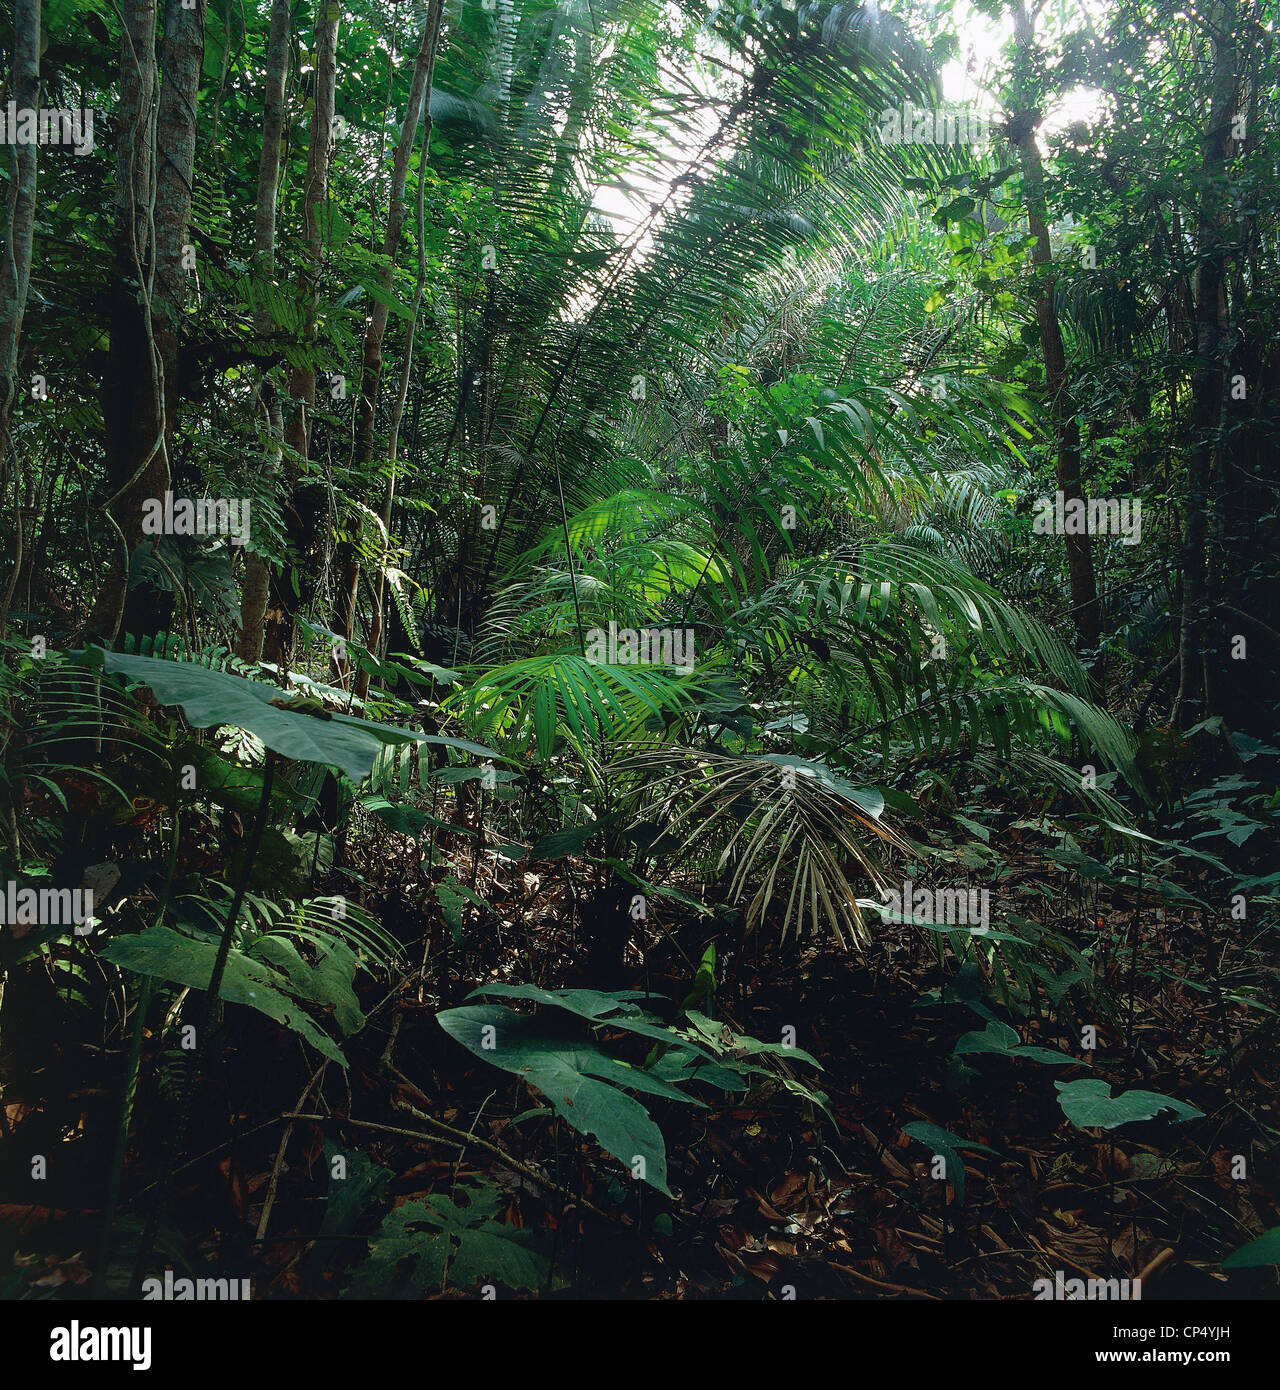 Cote d'Ivoire - Maraoue National Park - gallery forest, roots support the trunk of a tree. Stock Photo